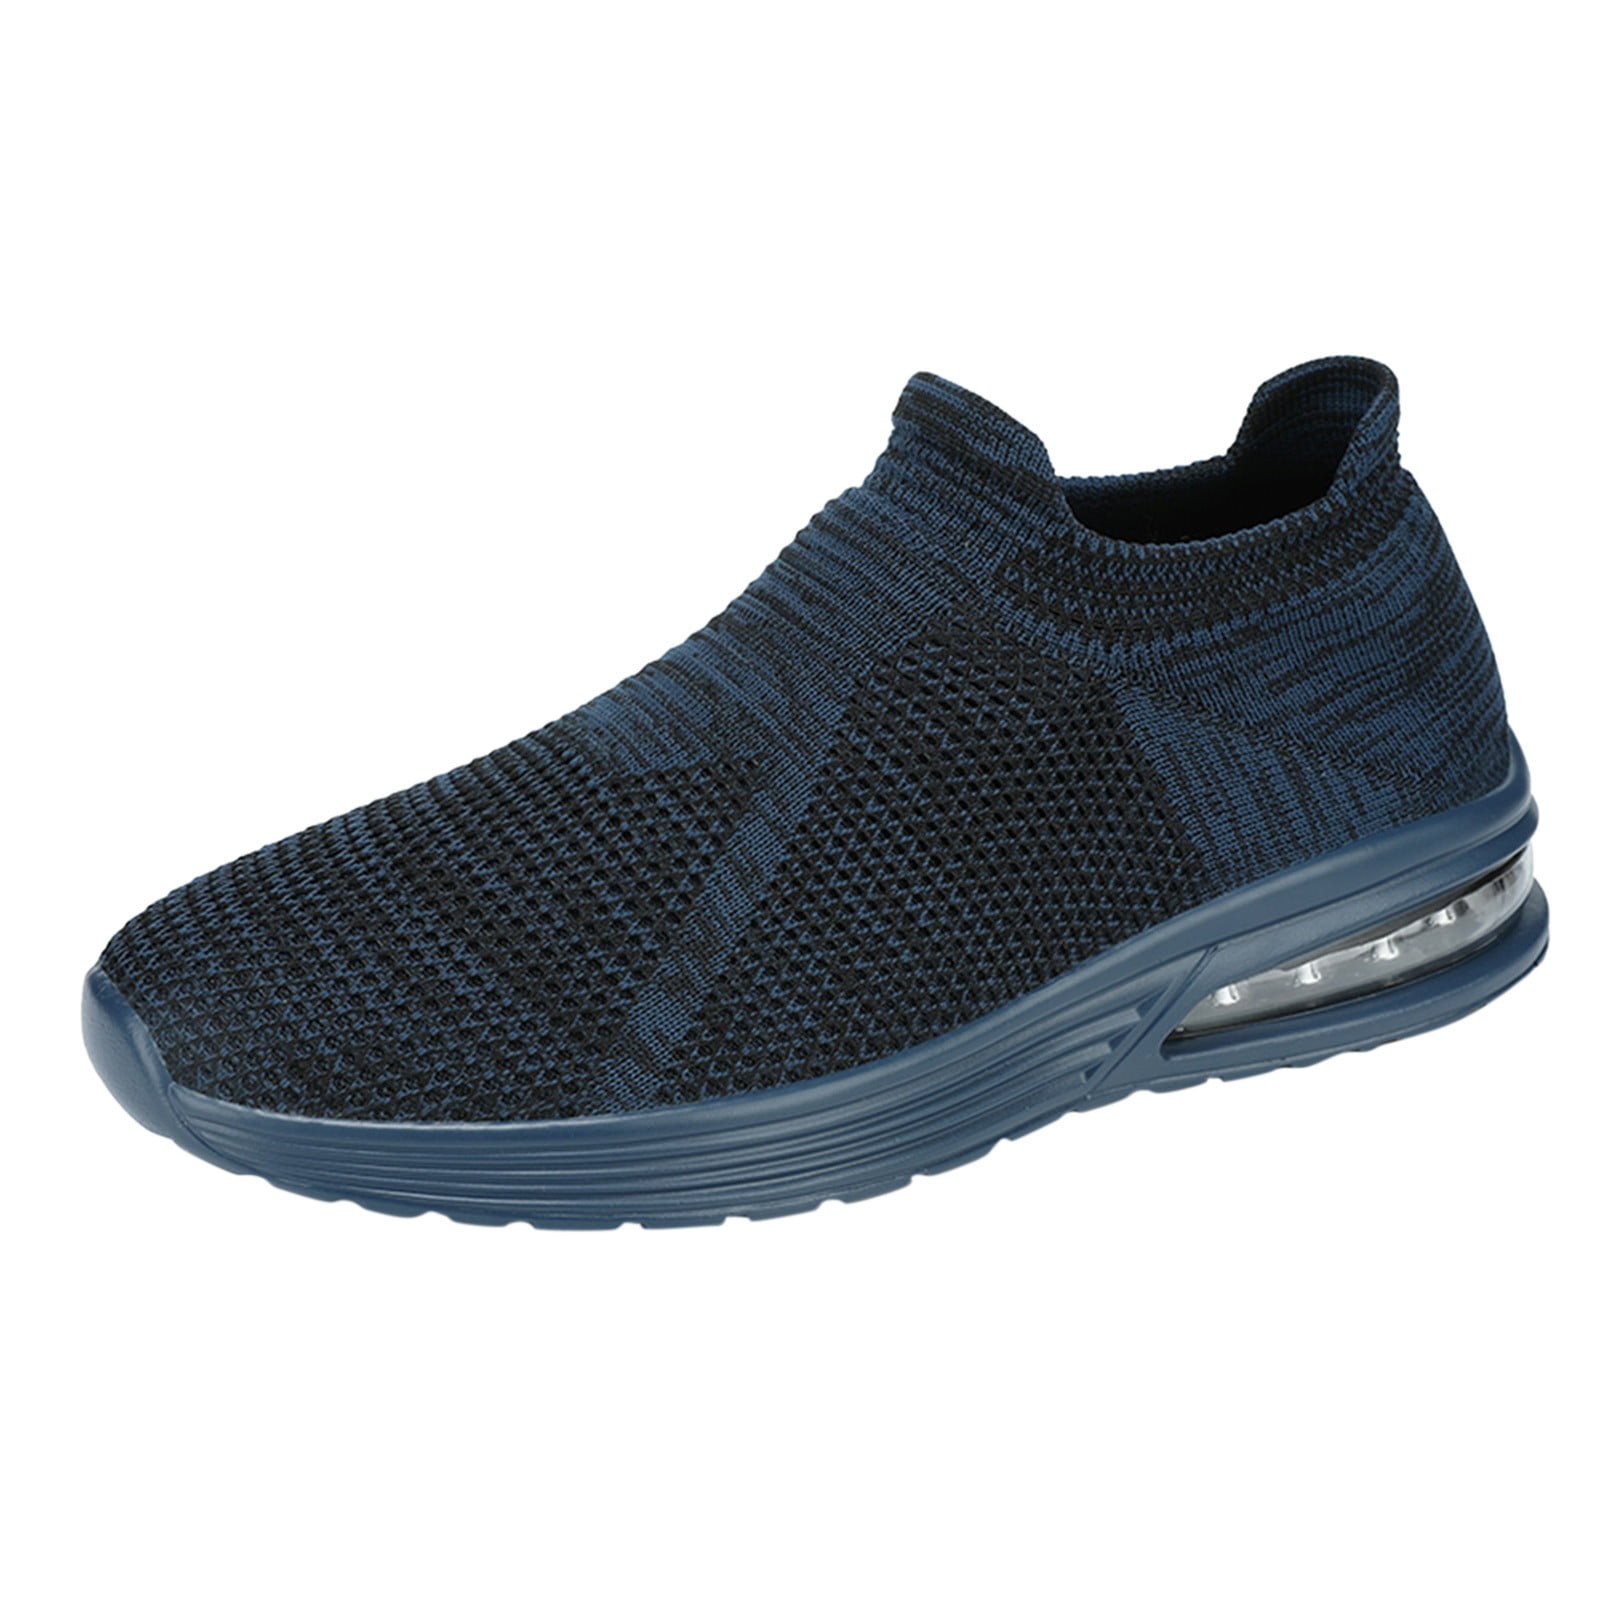 Sneakers For Men Fashion Summer Men Sneakers Mesh Breathable Comfortable Air Cushion Sole Casual Slip On Sneakers Mesh Dark Blue 43 - Walmart.com